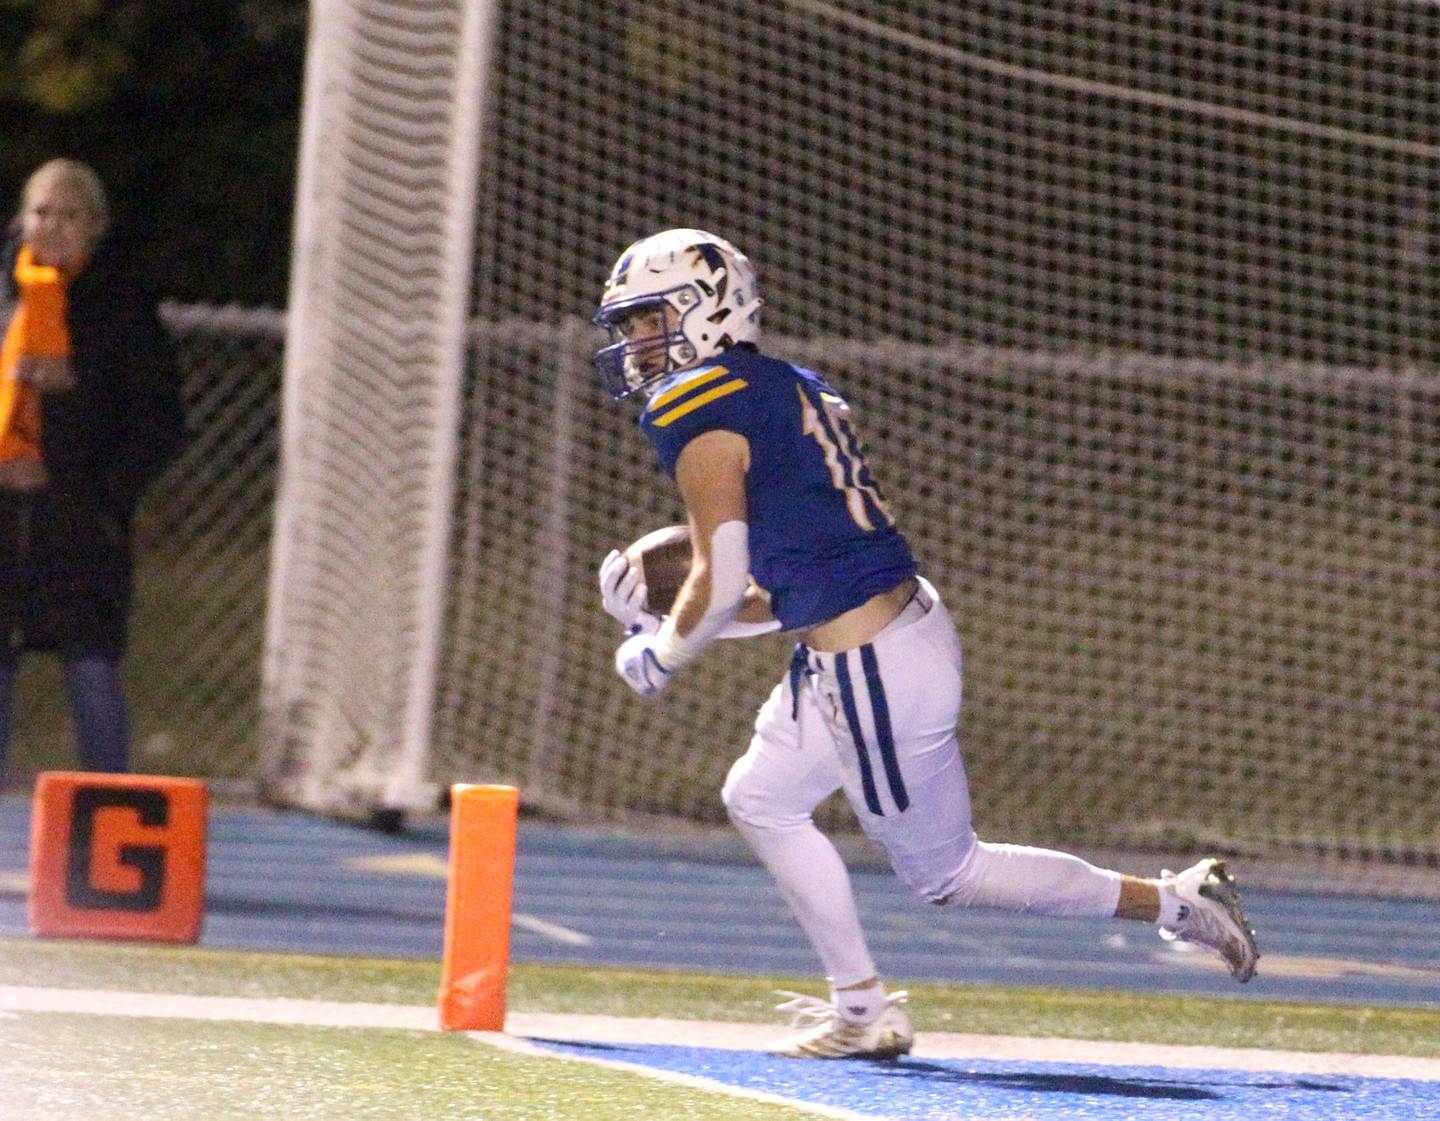 Wheaton North’s Tyler O'Connor makes an interception in Wheaton Warrenville South’s endzone during a game at North on Friday, Oct. 7, 2022.